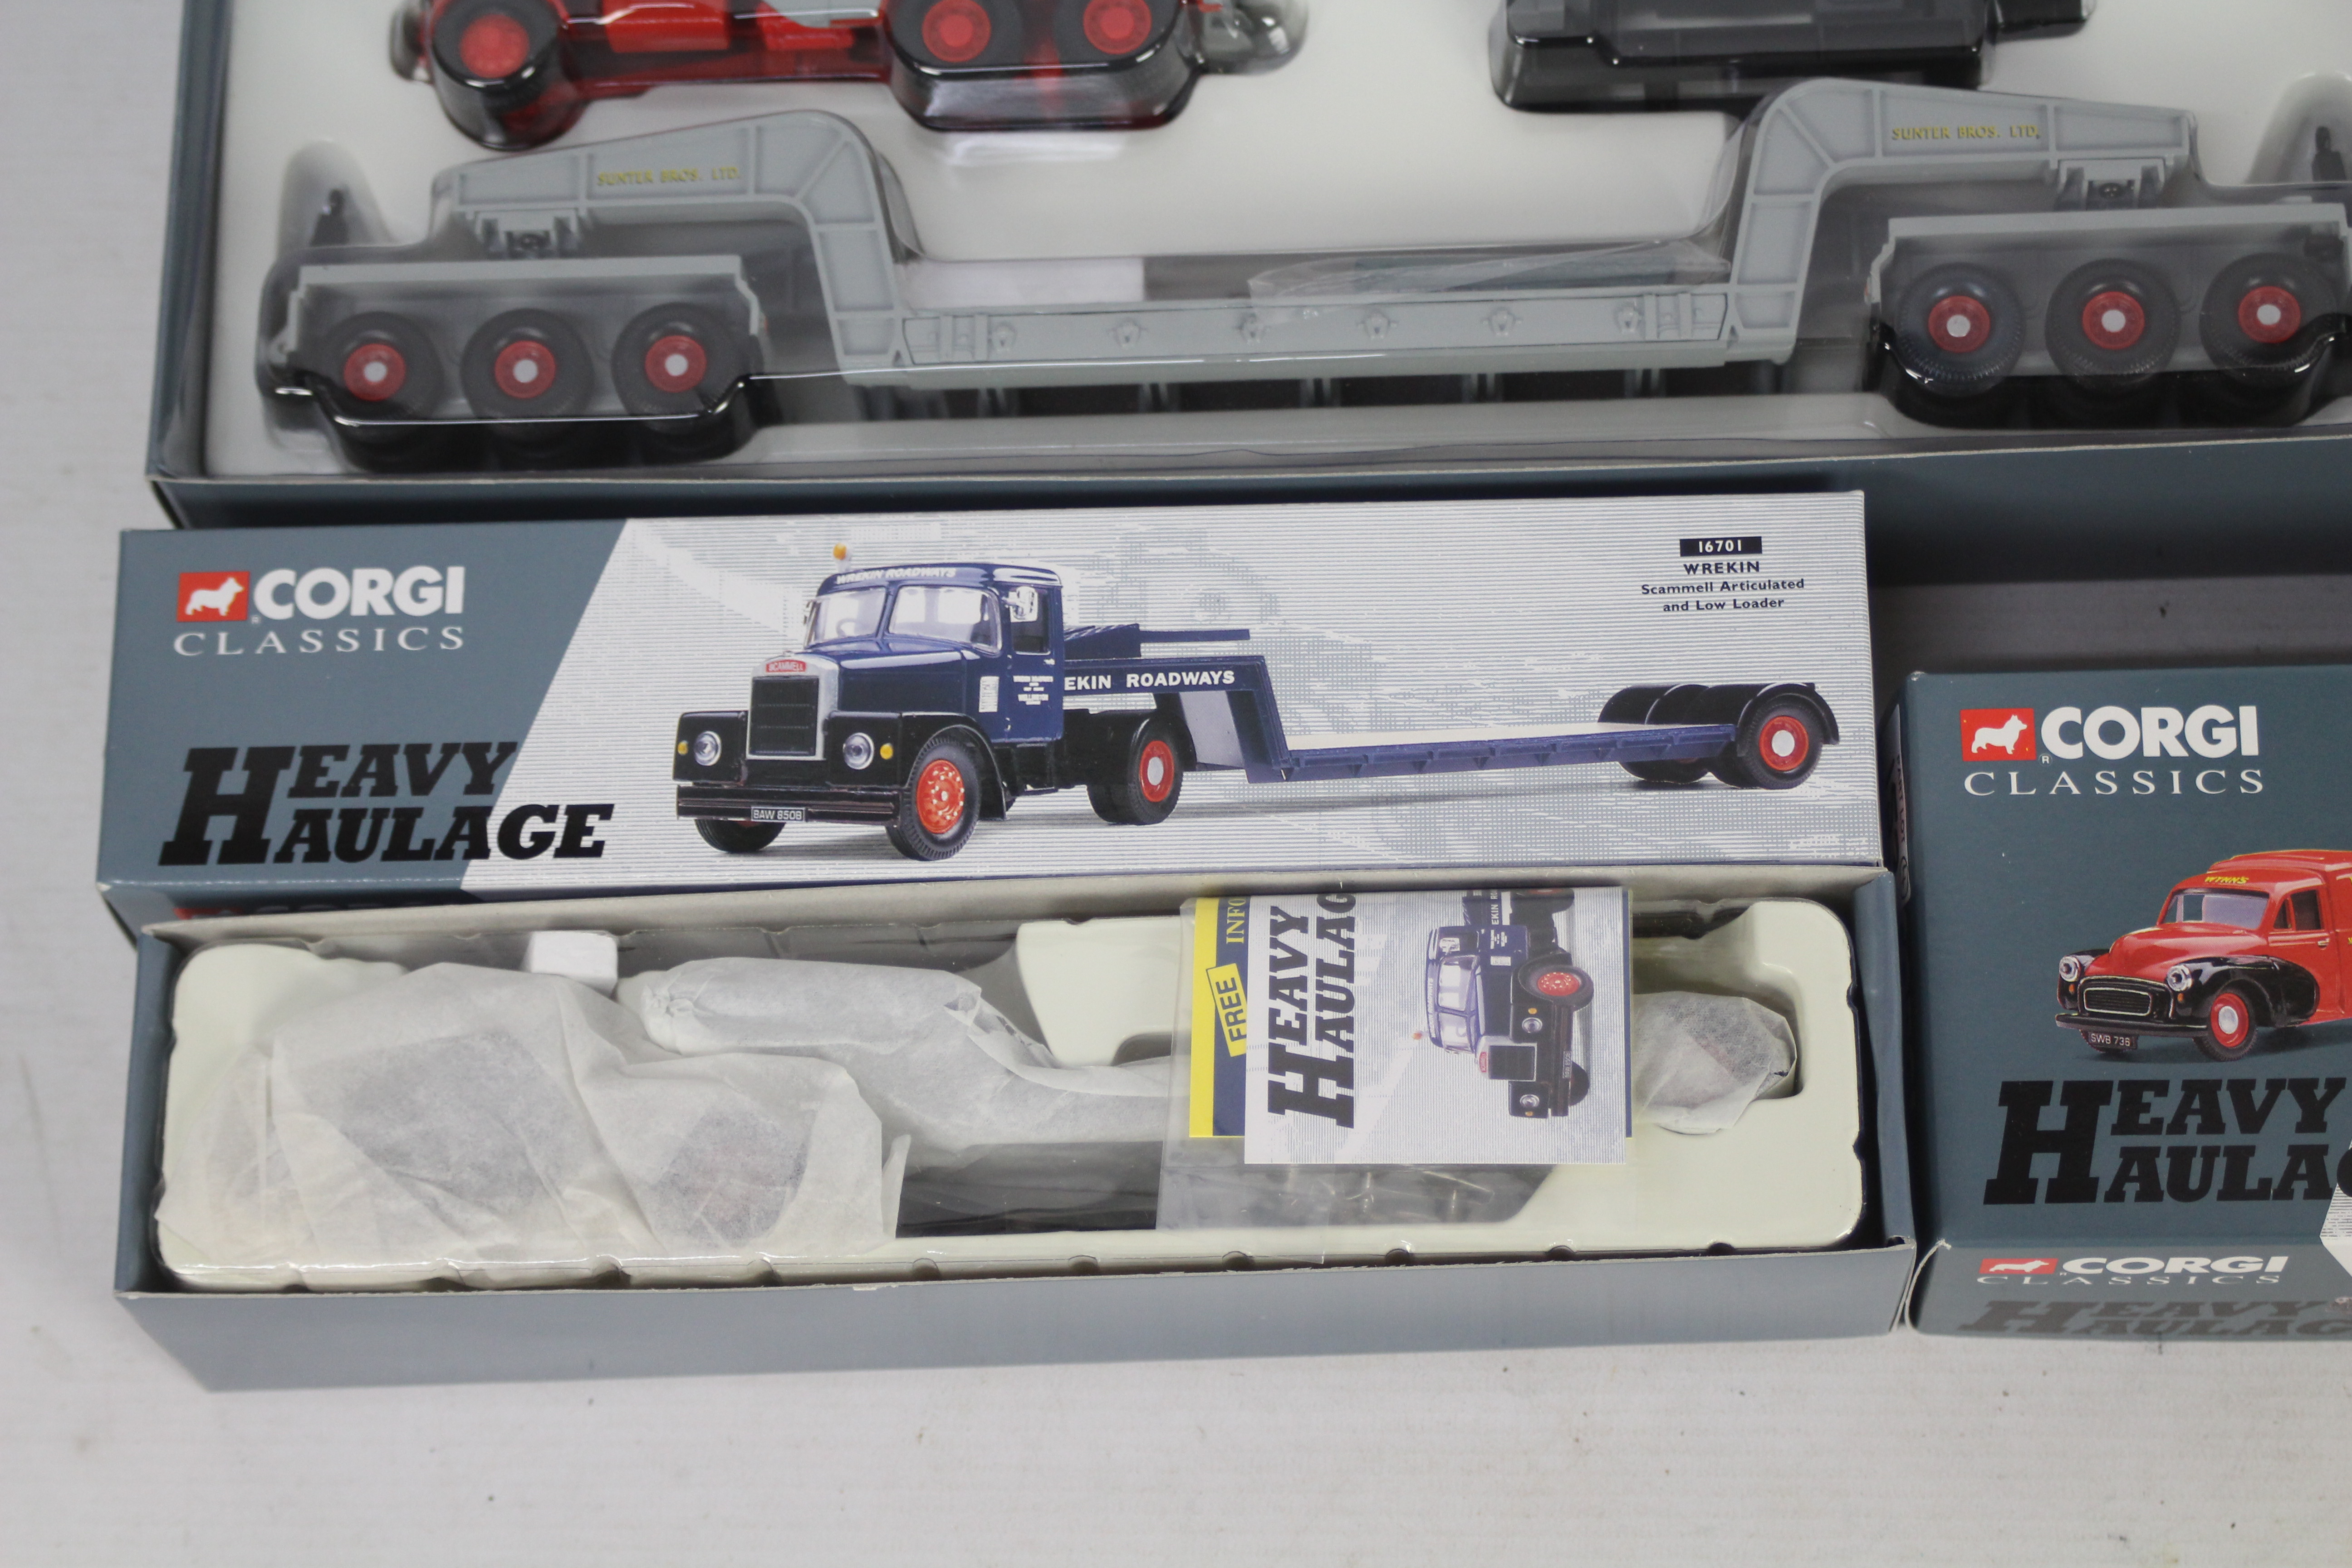 Corgi Heavy Haulage - Four boxed Limited Edition diecast commercial model vehicles from the Corgi - Image 4 of 4